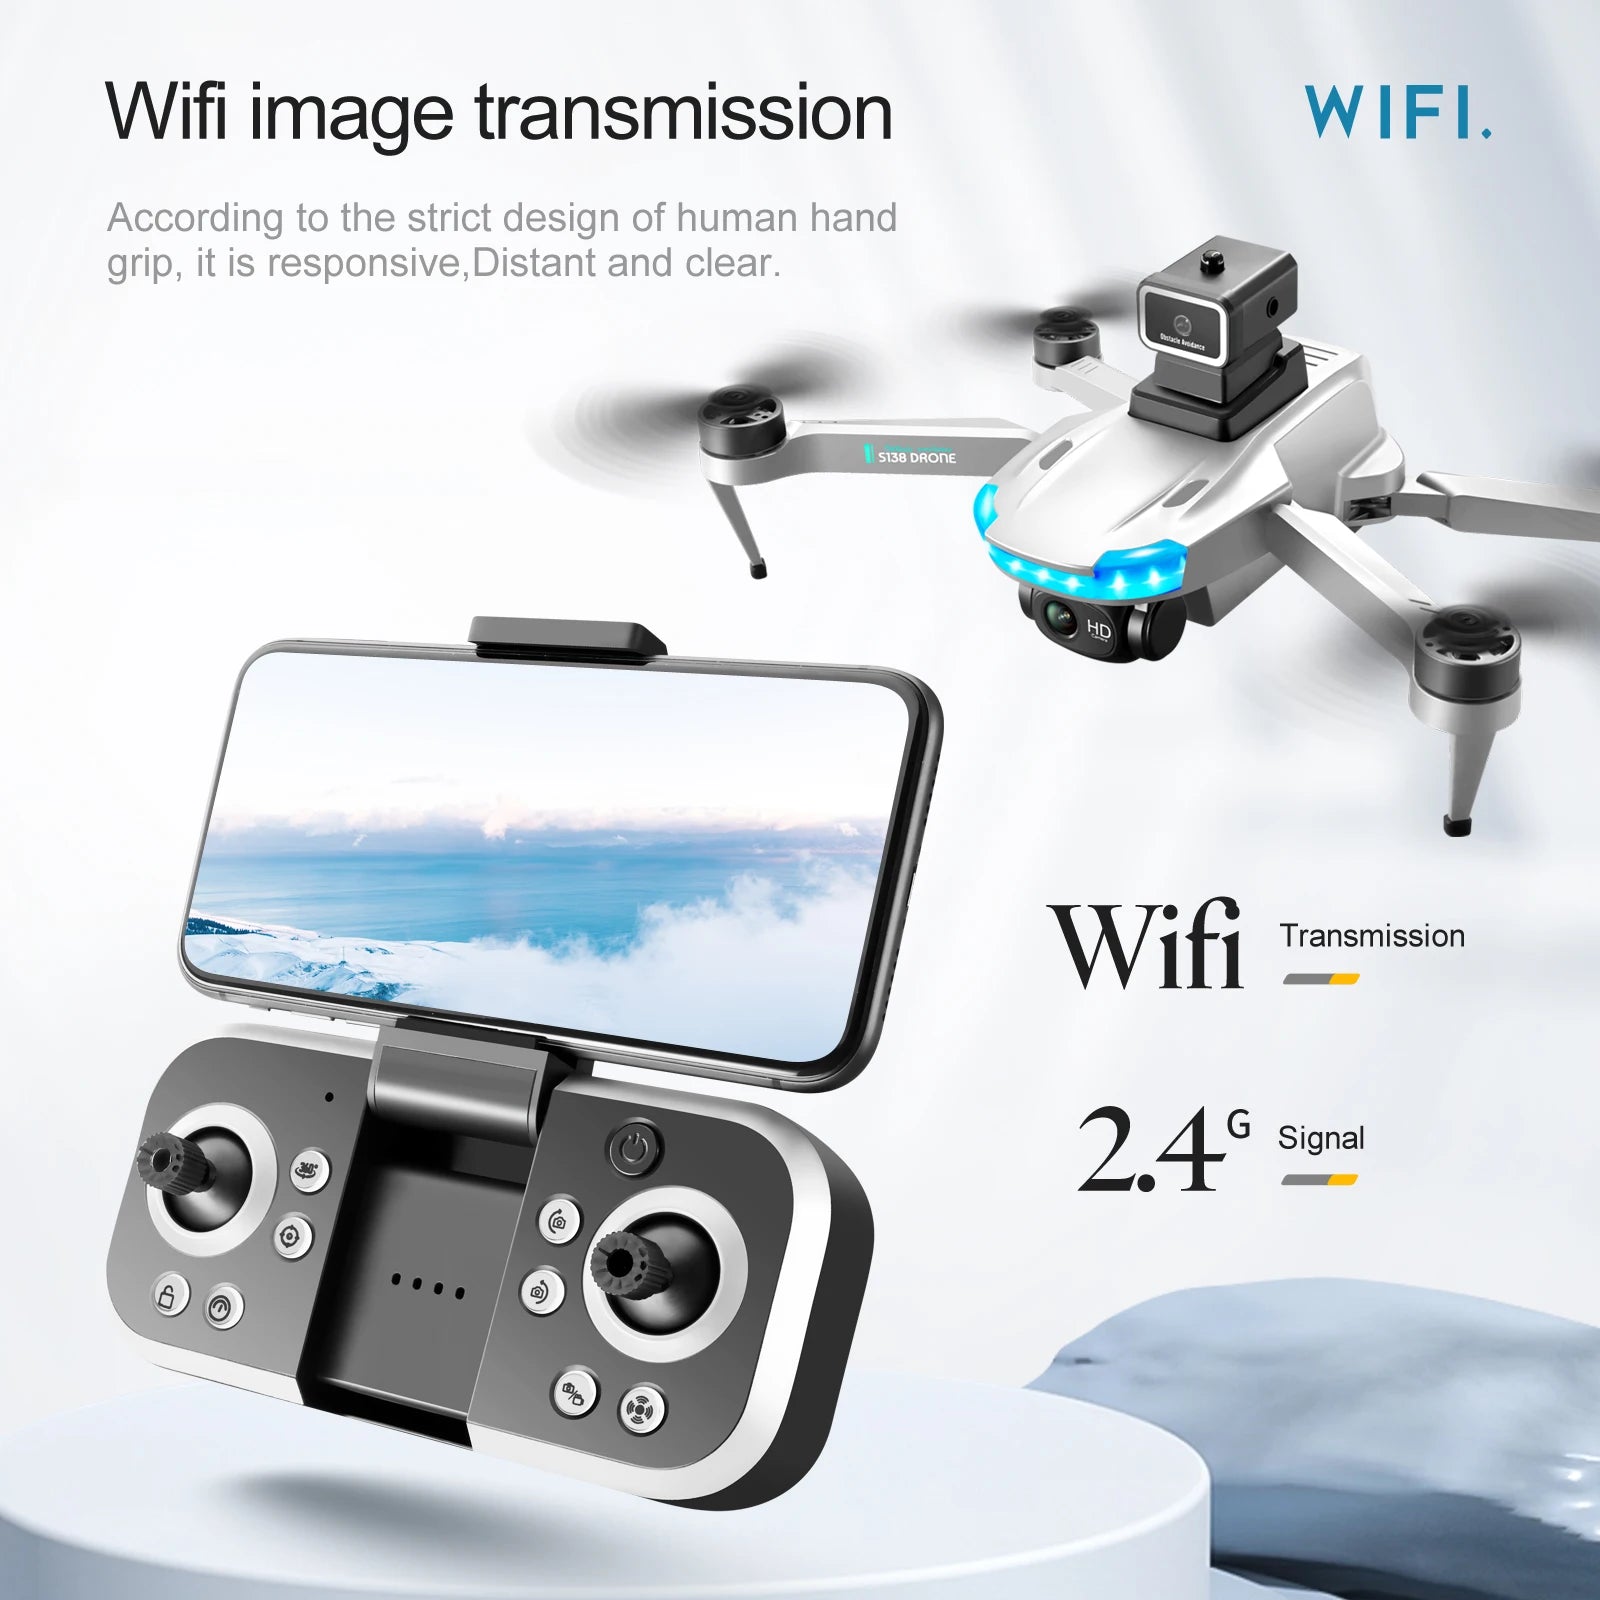 S138 Drone, wifi image transmission wifl. according to the strict design of